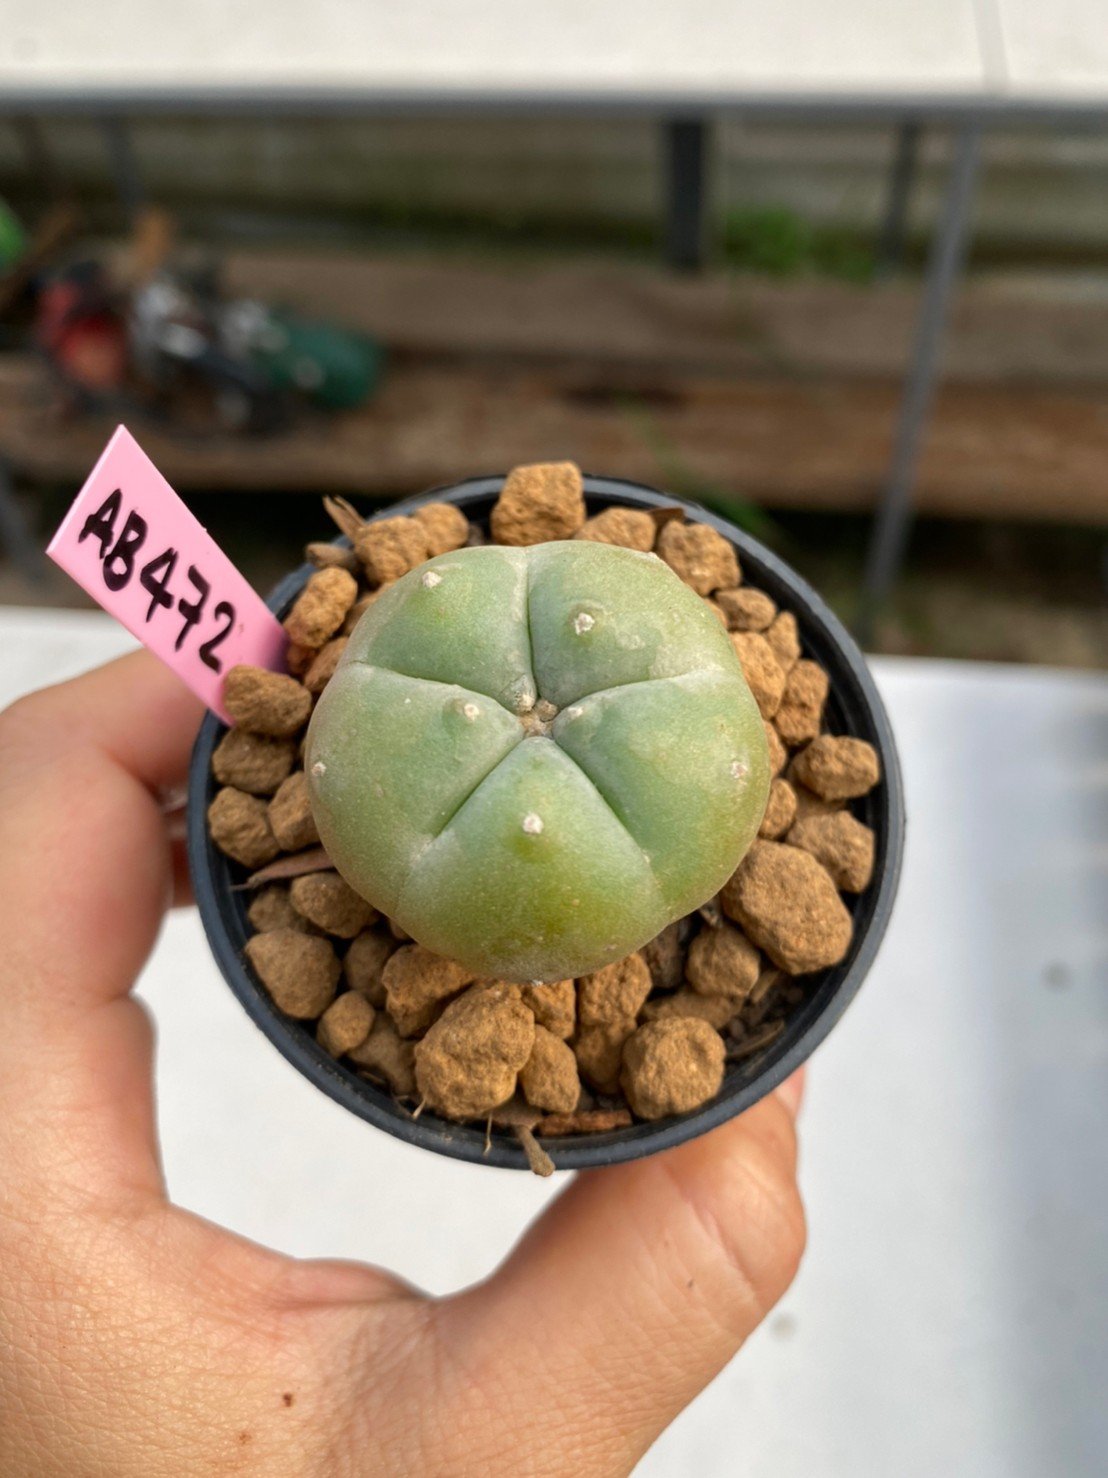 Lophophora williamsii 3-4 cm 7 years old ownroot grow from seed